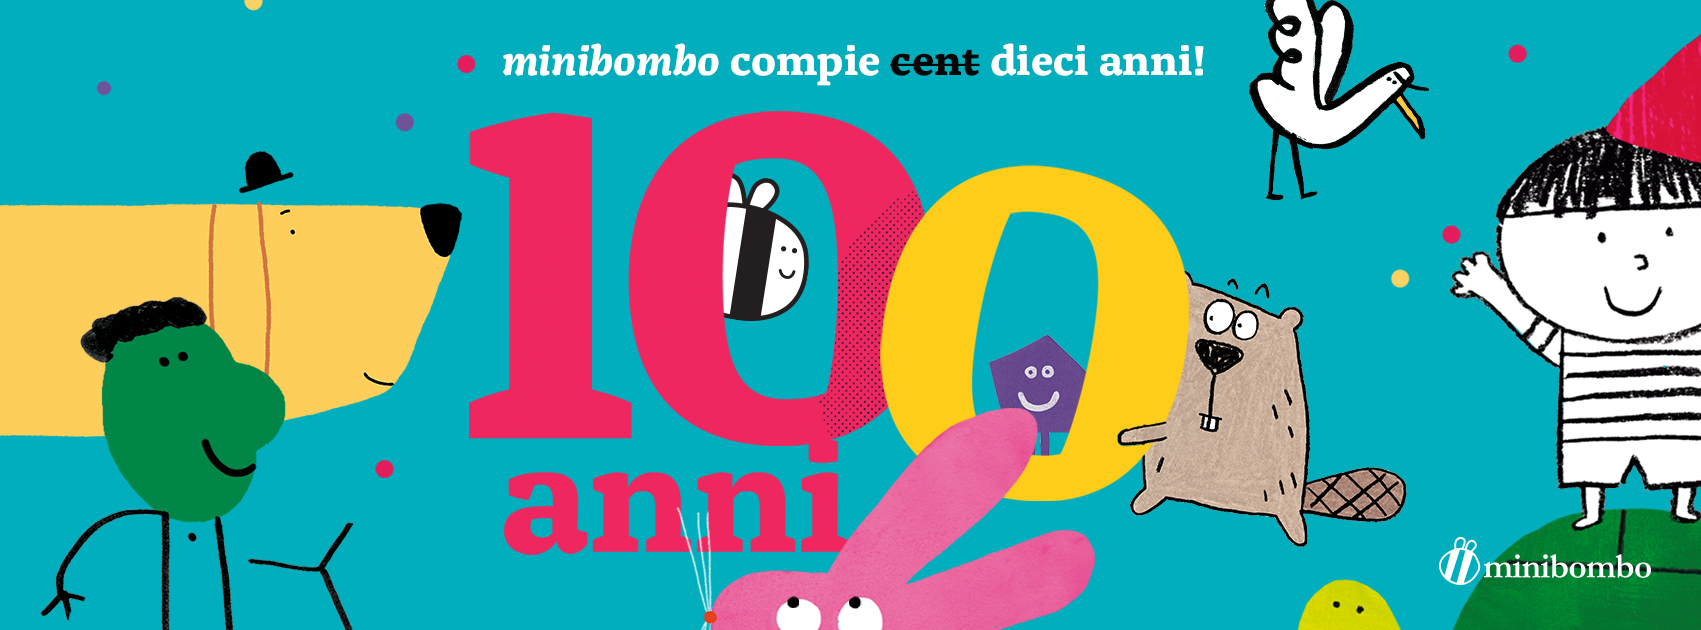 <strong>MINIBOMBO COMPIE 10 ANNI!</strong>